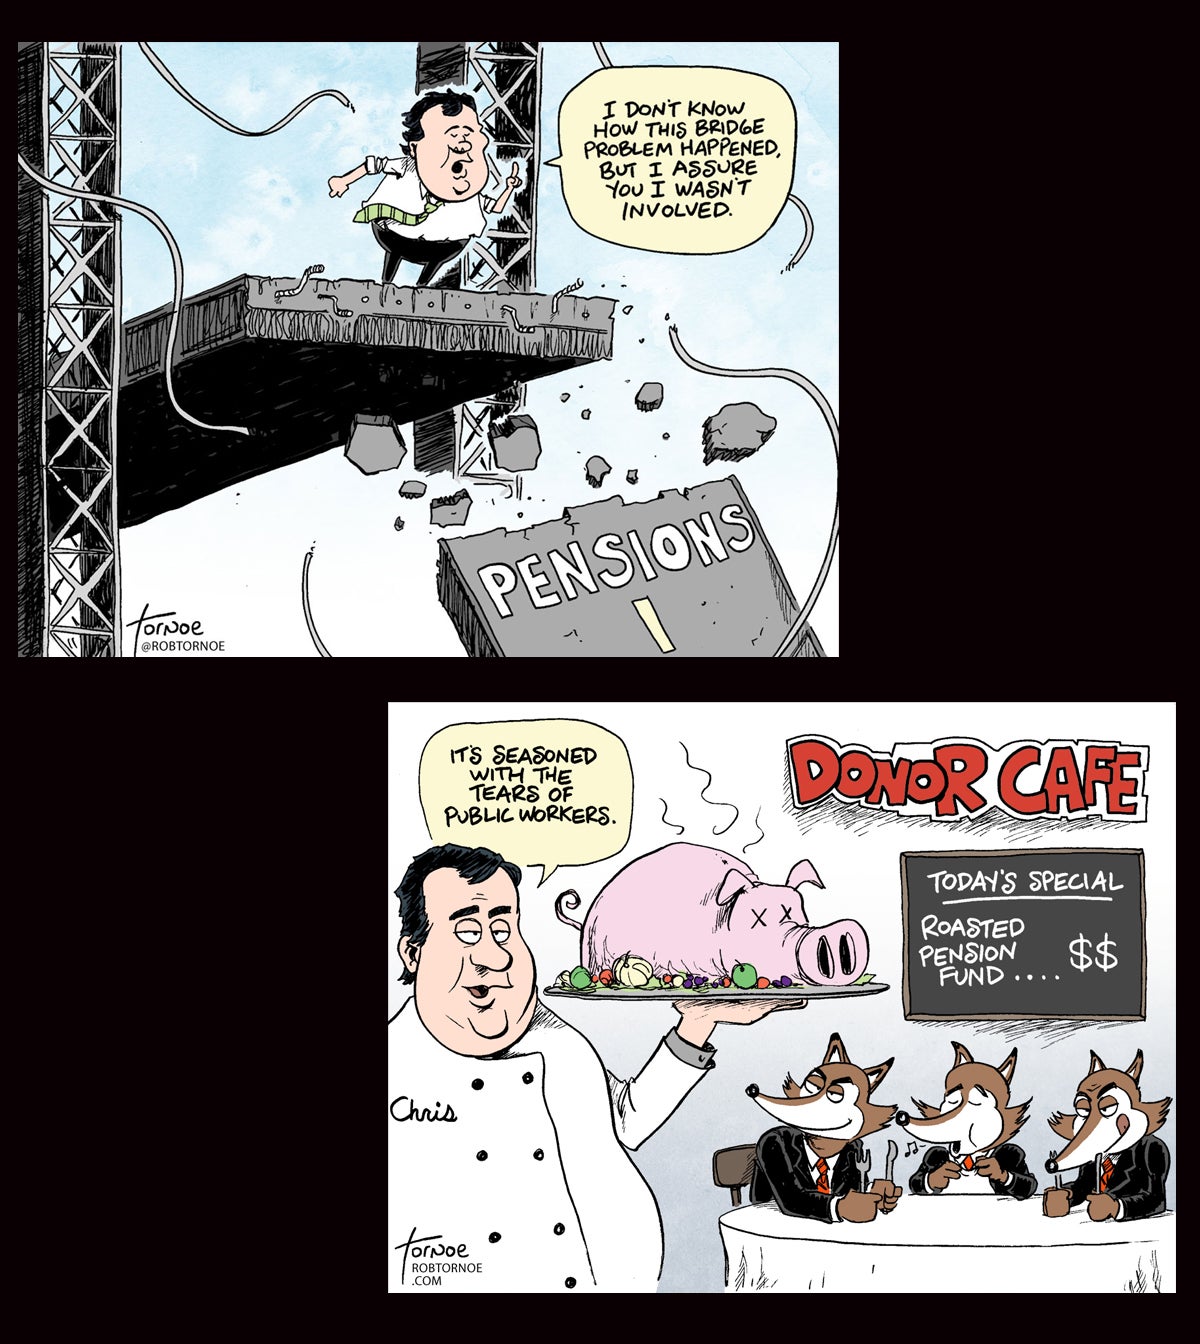 20150313 two cartoons on pensions 1200